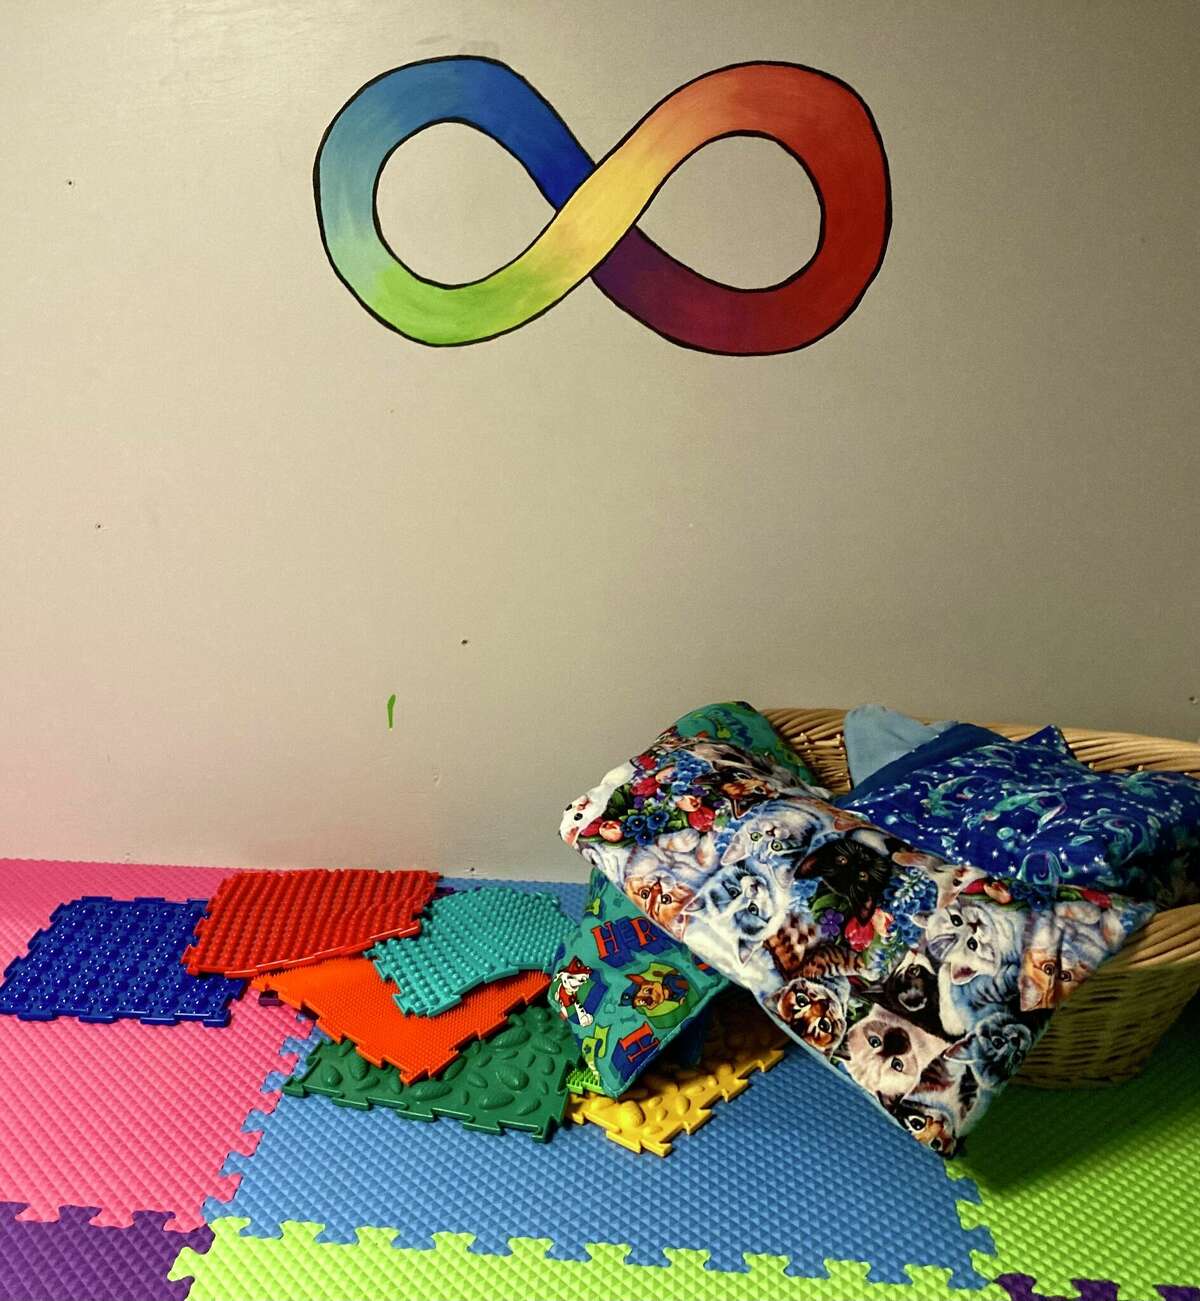 The Calming Corner at Sandcastles Children's Museum includes weighted lap blankets, stuffed animal pillows and an infinity symbol on the wall.